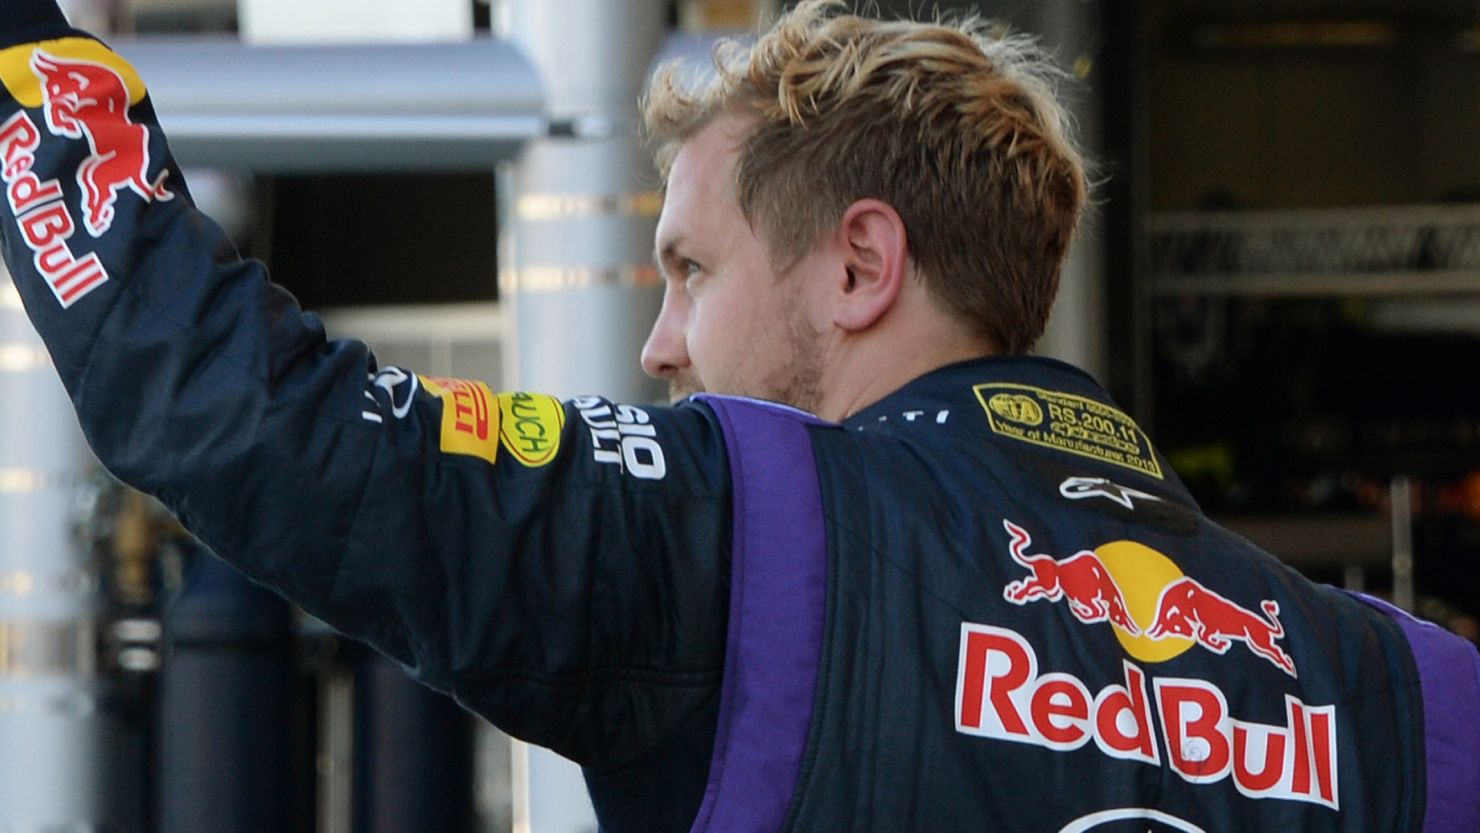 Sebastian Vettel waves to fans as he again proves quickest in practice ahead of the Japanese Grand Prix on Sunday.